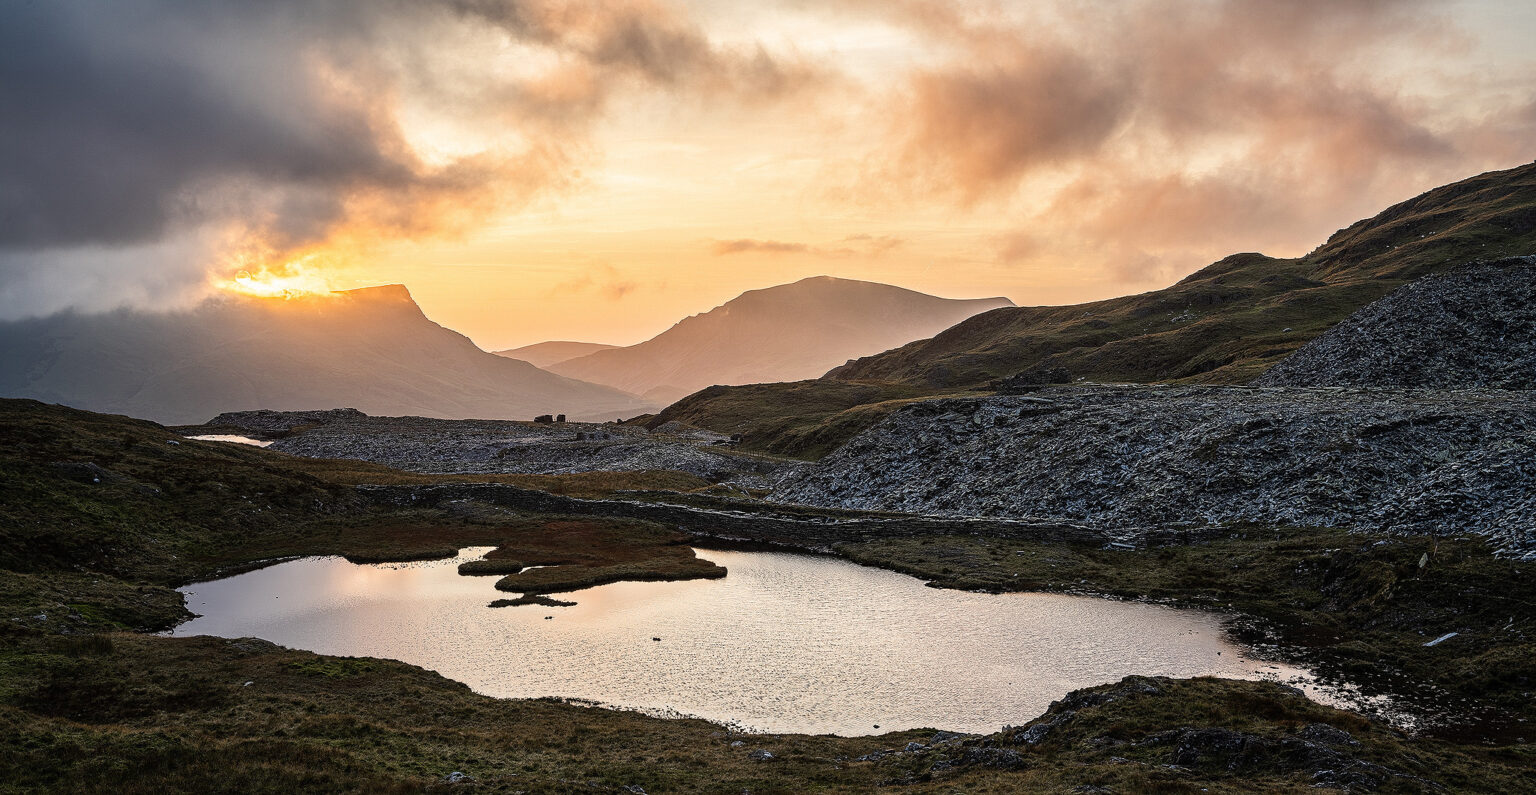 Snowdonia Wild Camping Photography Workshop